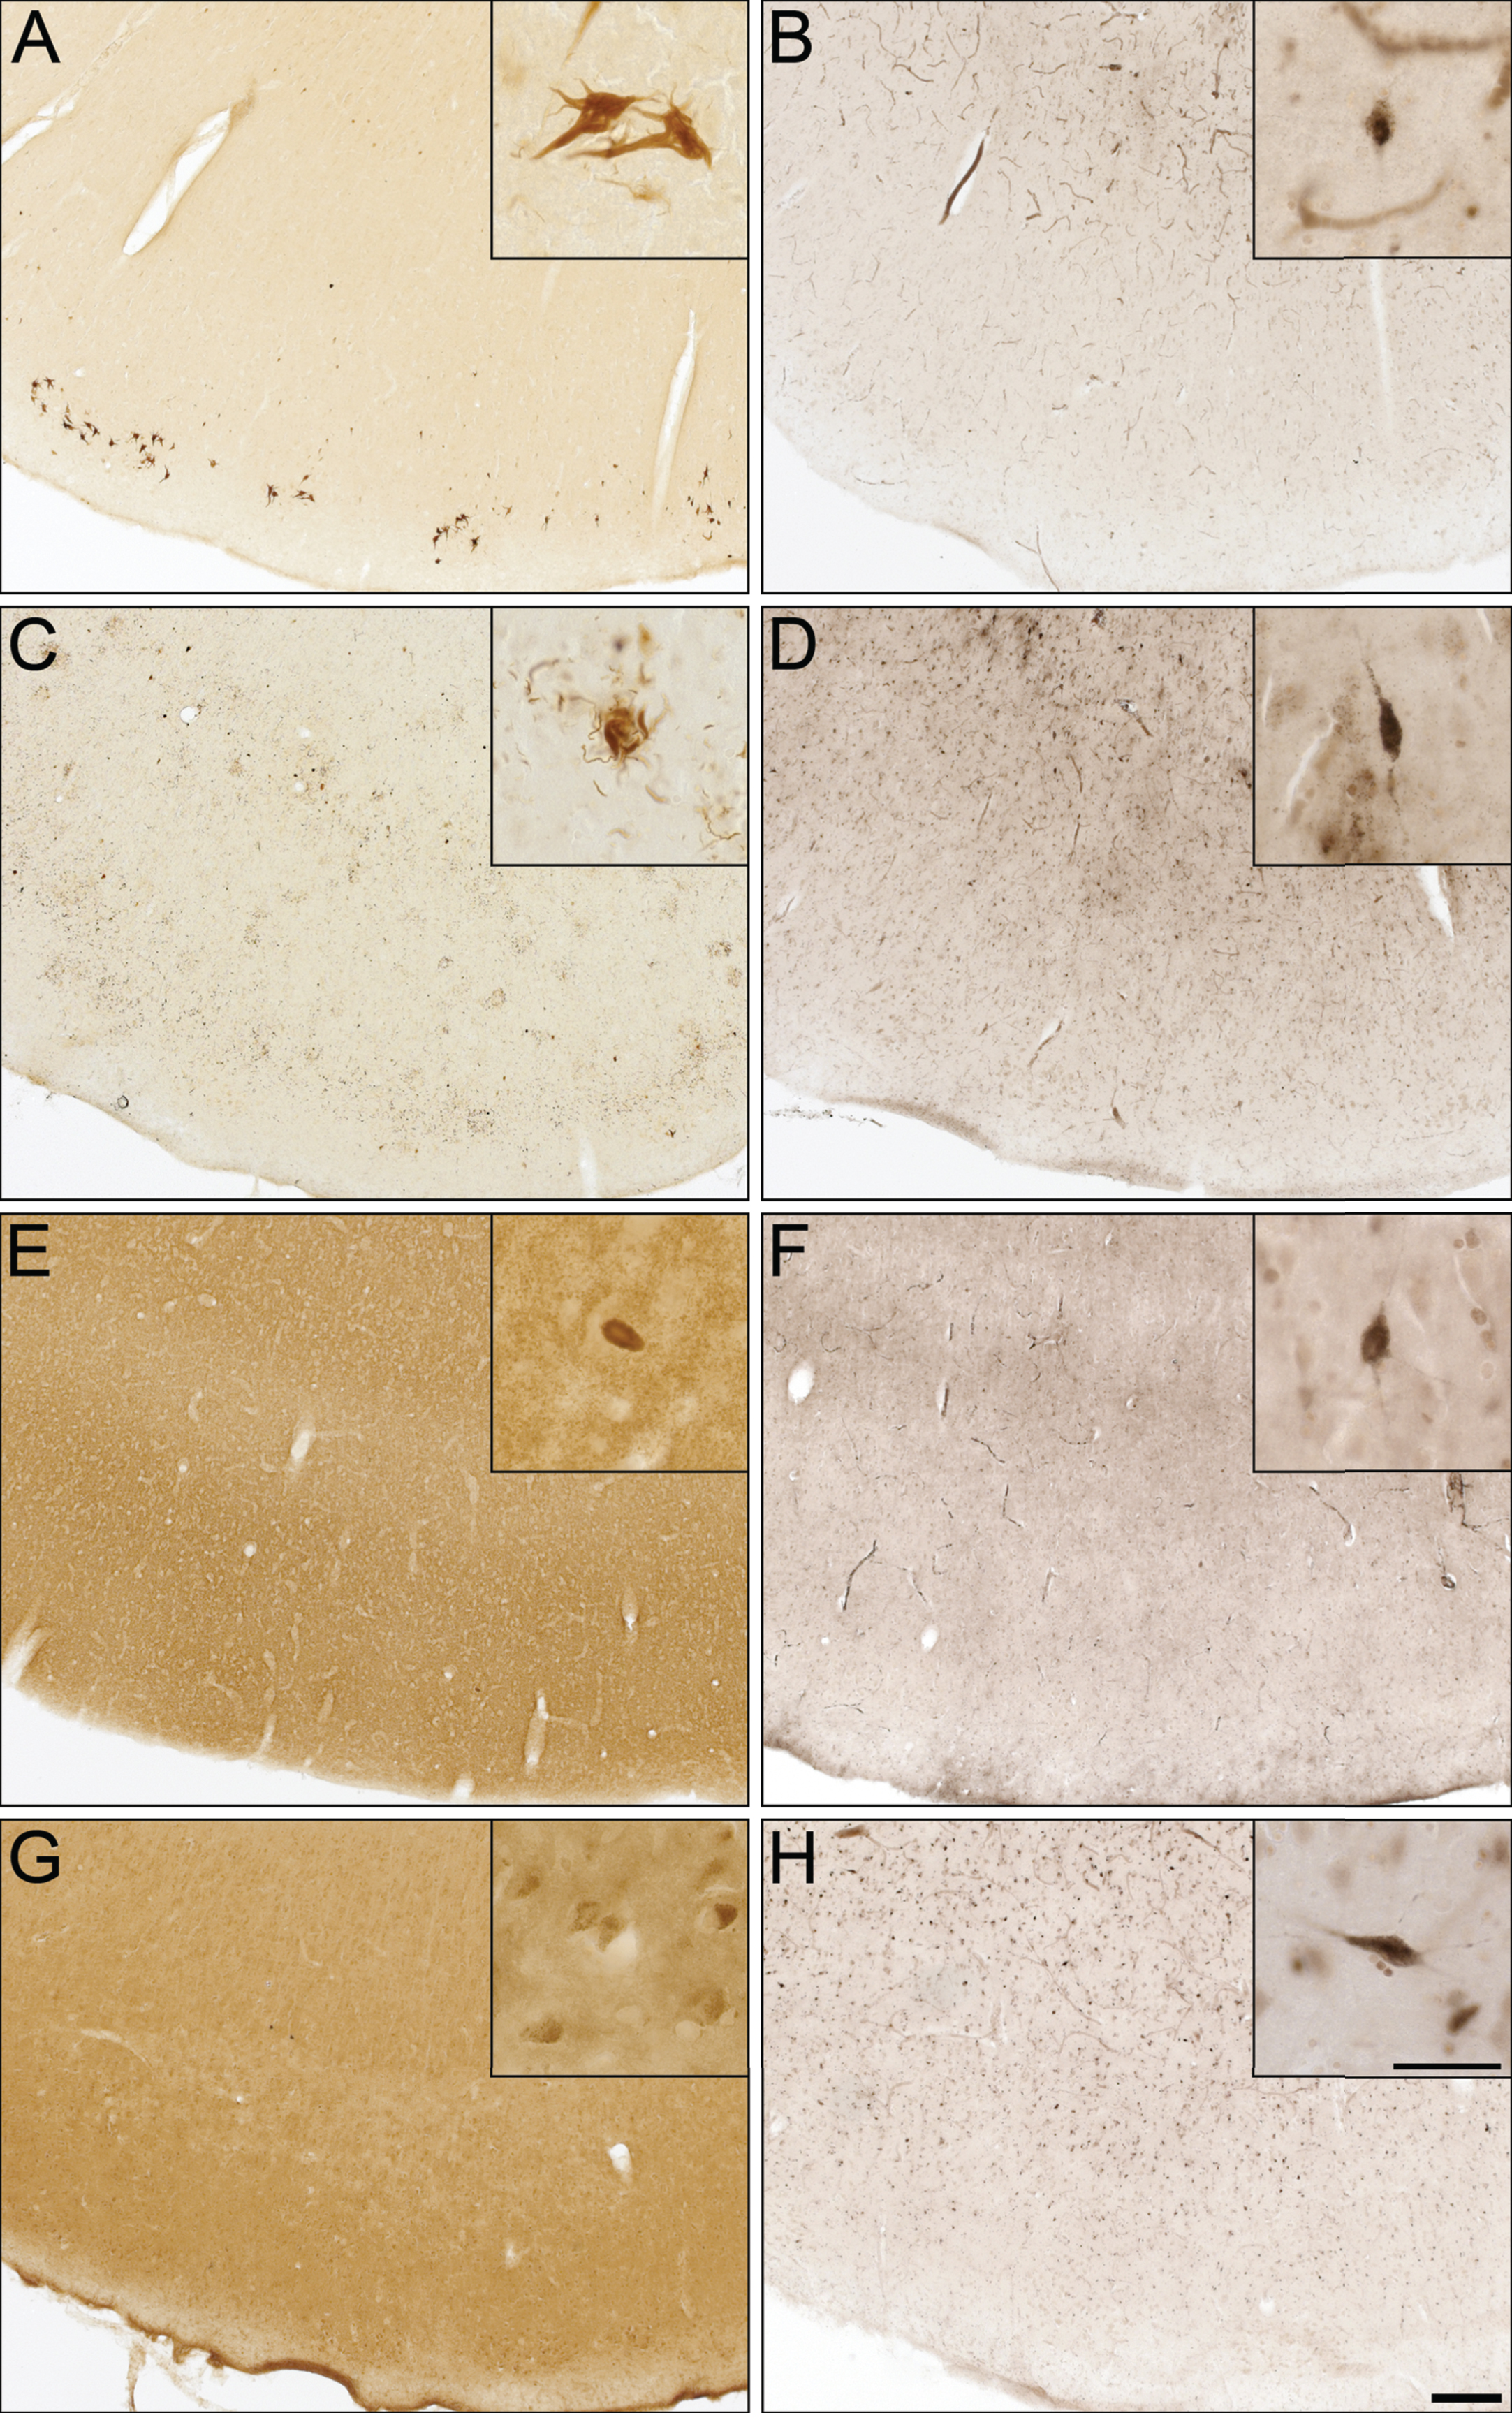 Photomicrographs of postmortem human entorhinal cortex from corticobasal degeneration (A,B), frontotemporal dementia with tau (C,D), dementia with Lewy bodies (E,F), and vascular dementia (G,H) stained for tau 3R (A), tau 4R (C), α-synuclein (E), Aβ (G), and butyrylcholinesterase (BChE) activity (B,D,F,H). Note, insets are higher magnification photomicrographs demonstrating examples of the pathology observed in each of the neurodegenerative diseases including neurofibrillary tangles (A), neuropil threads and degenerating neurites (C), Lewy bodies (E), and intraneuronal inclusions (G). Note, BChE staining was limited to a few scattered cortical neurons (insets B,D,F,H) and did not label pathological structures in these neurodegenerative diseases. Scale bars = 250 μm, insets 50 μm.